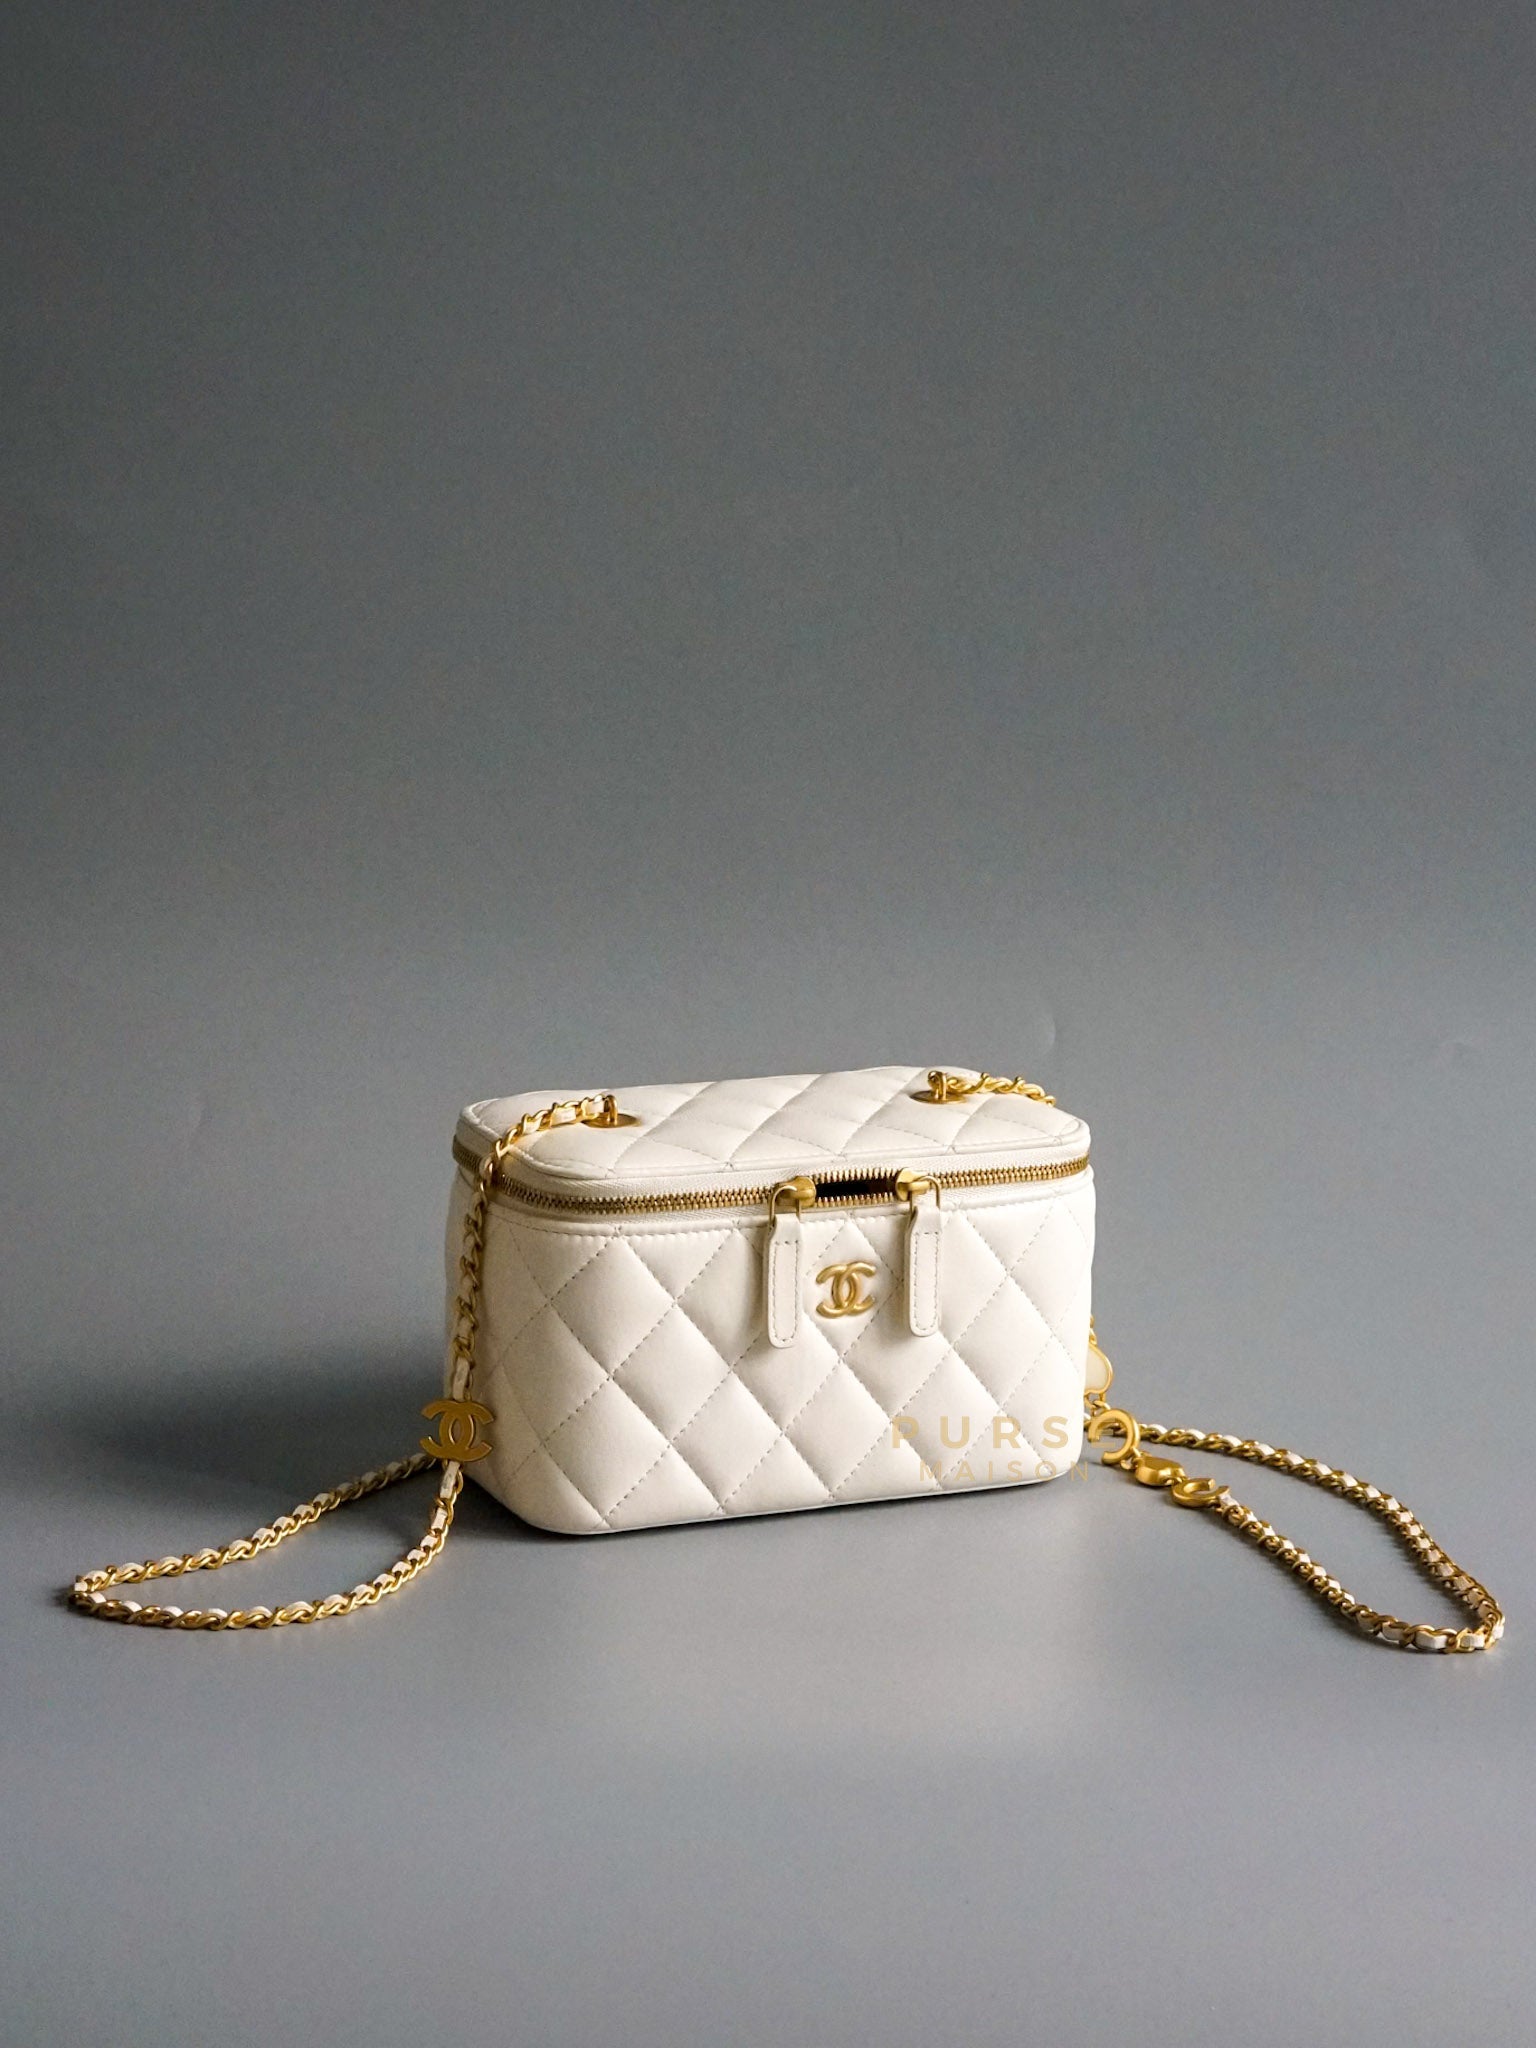 CC Vanity with Chain in White Quilted Lambskin Leather and Gold Hardware (Microchip) | Purse Maison Luxury Bags Shop